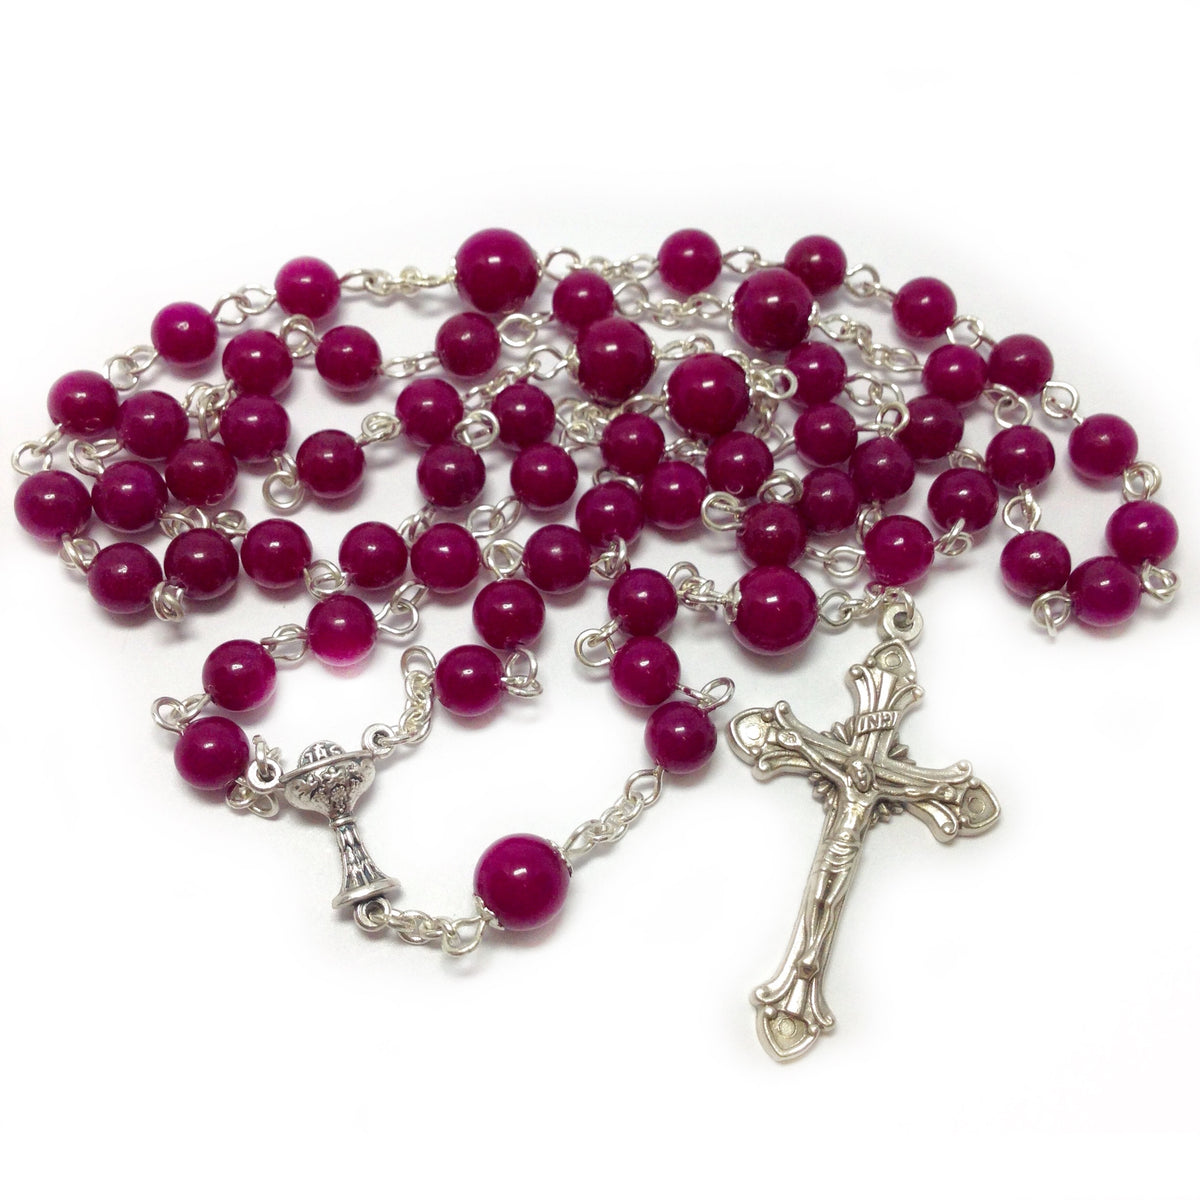 Holy Communion Rosary with fuchsia beads – Marian Graces